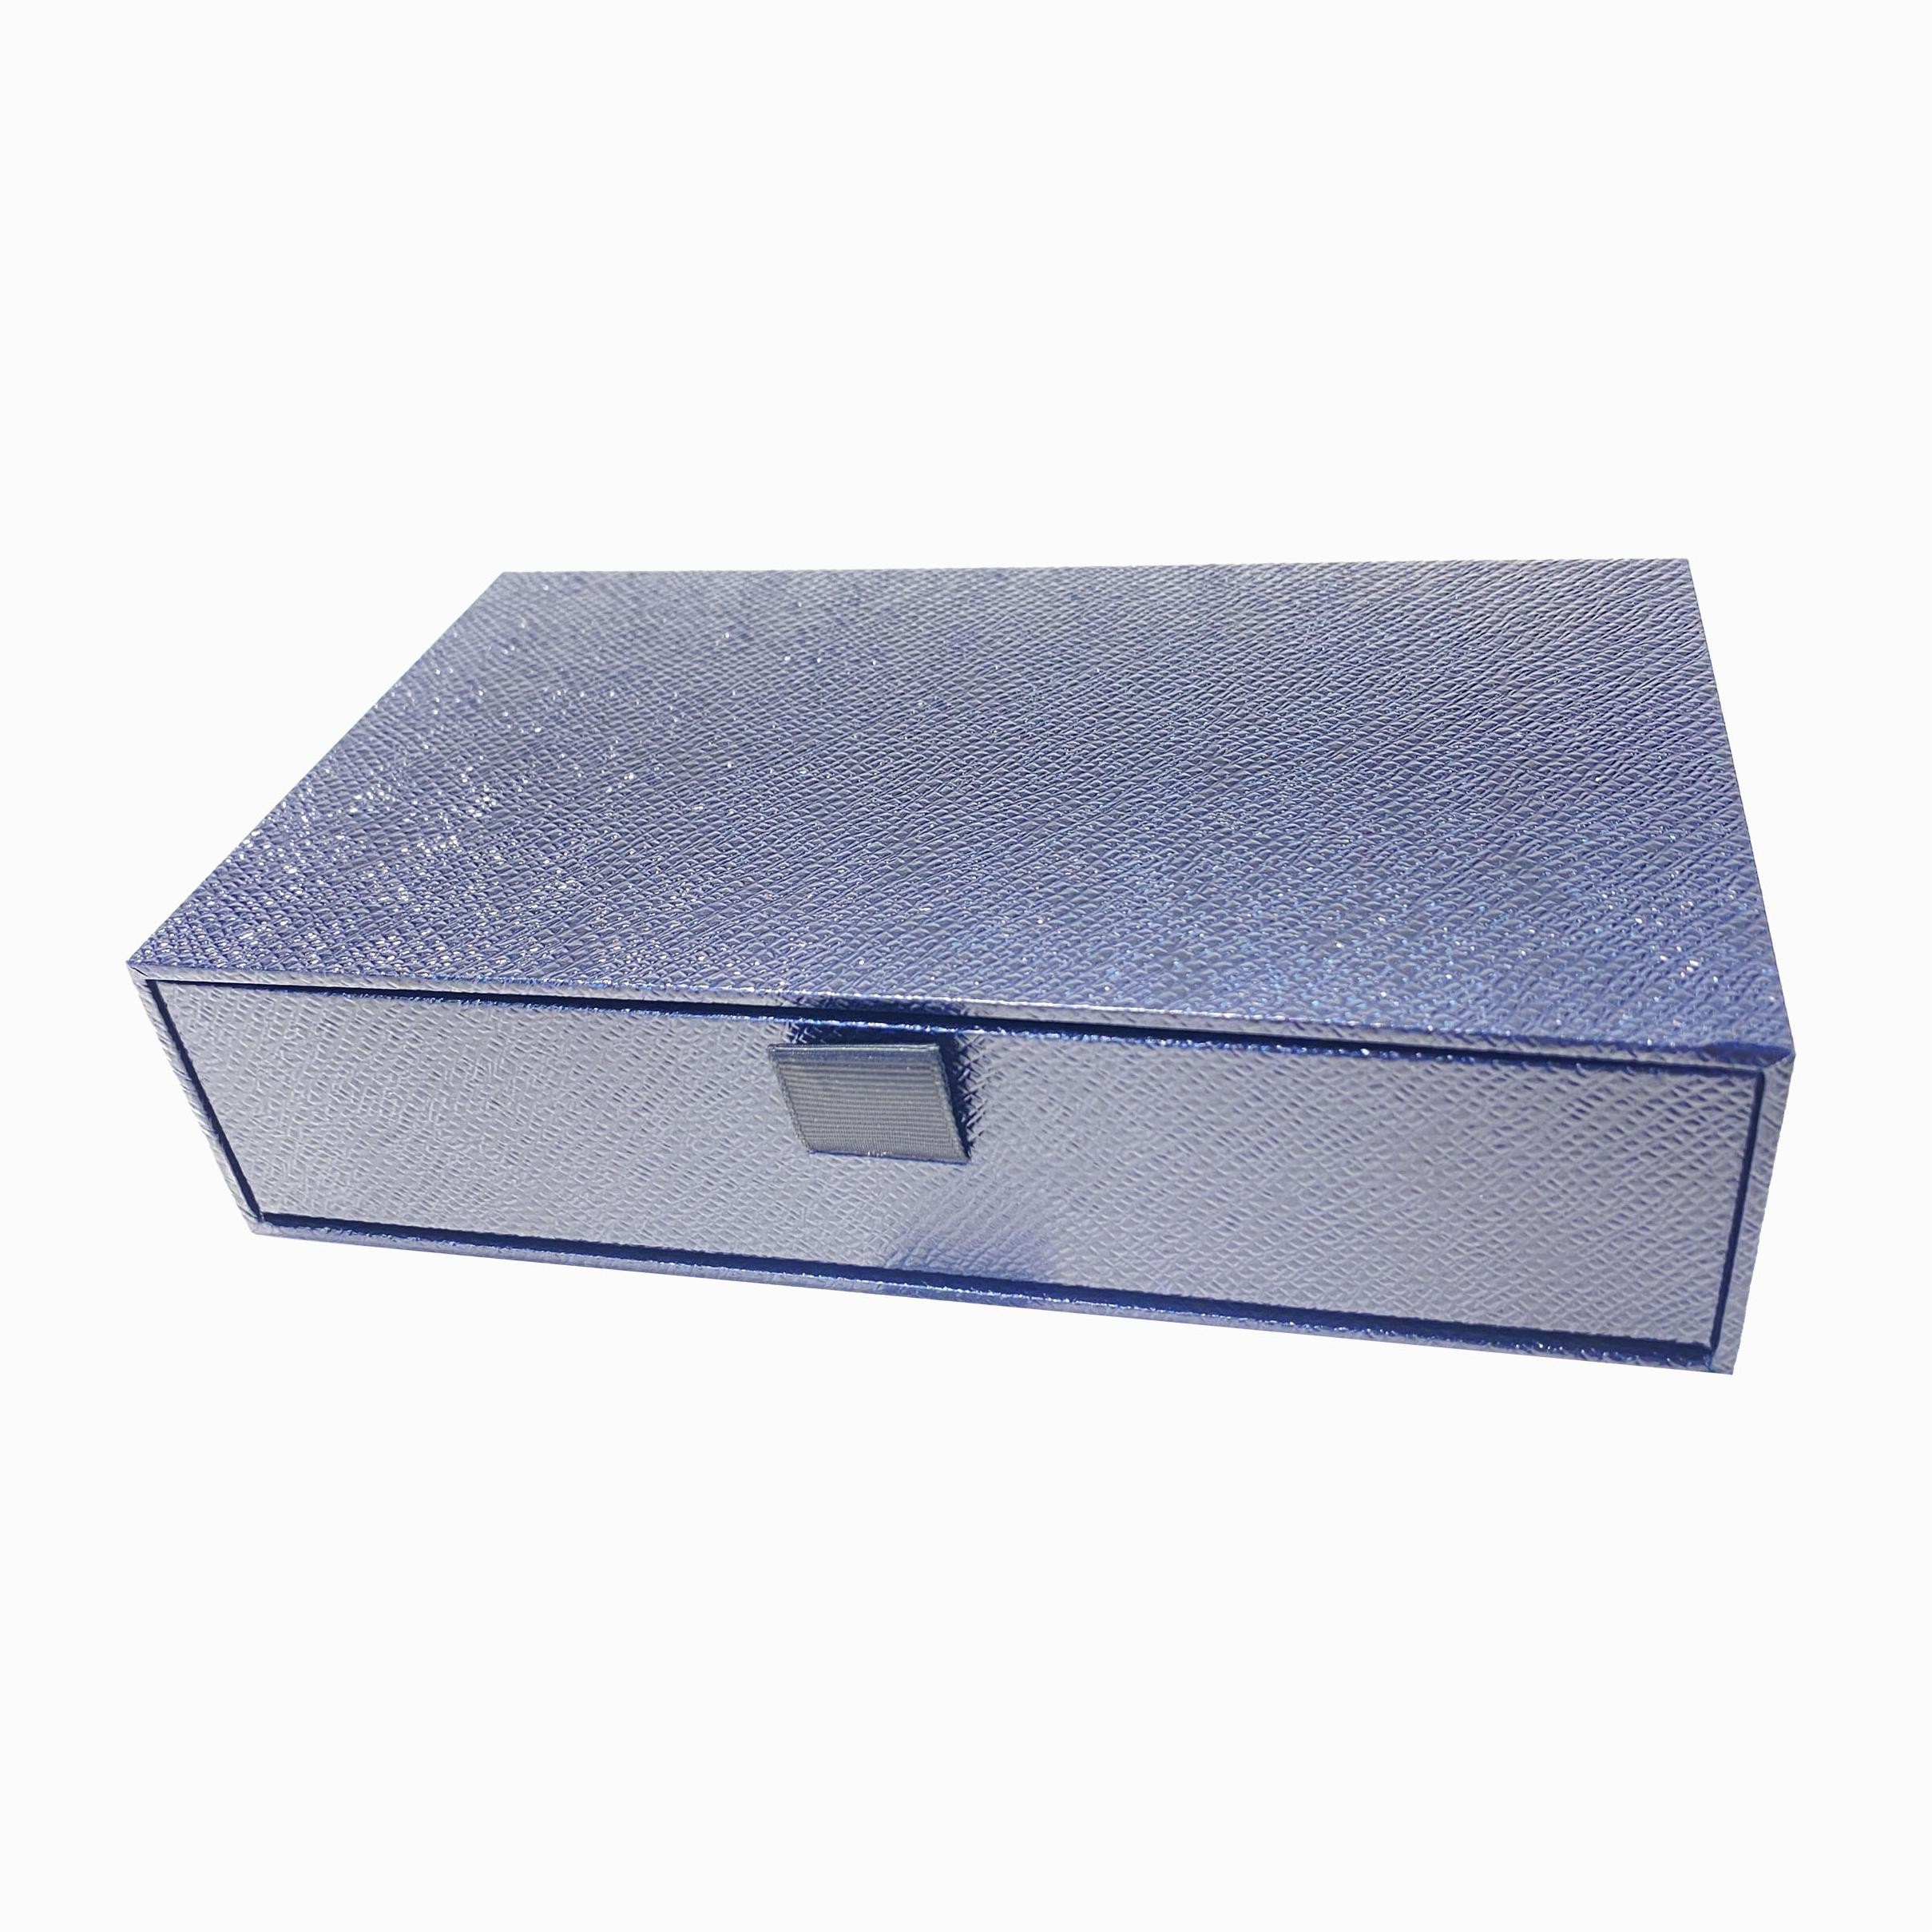 Black drawer box Small and convenient packaging box